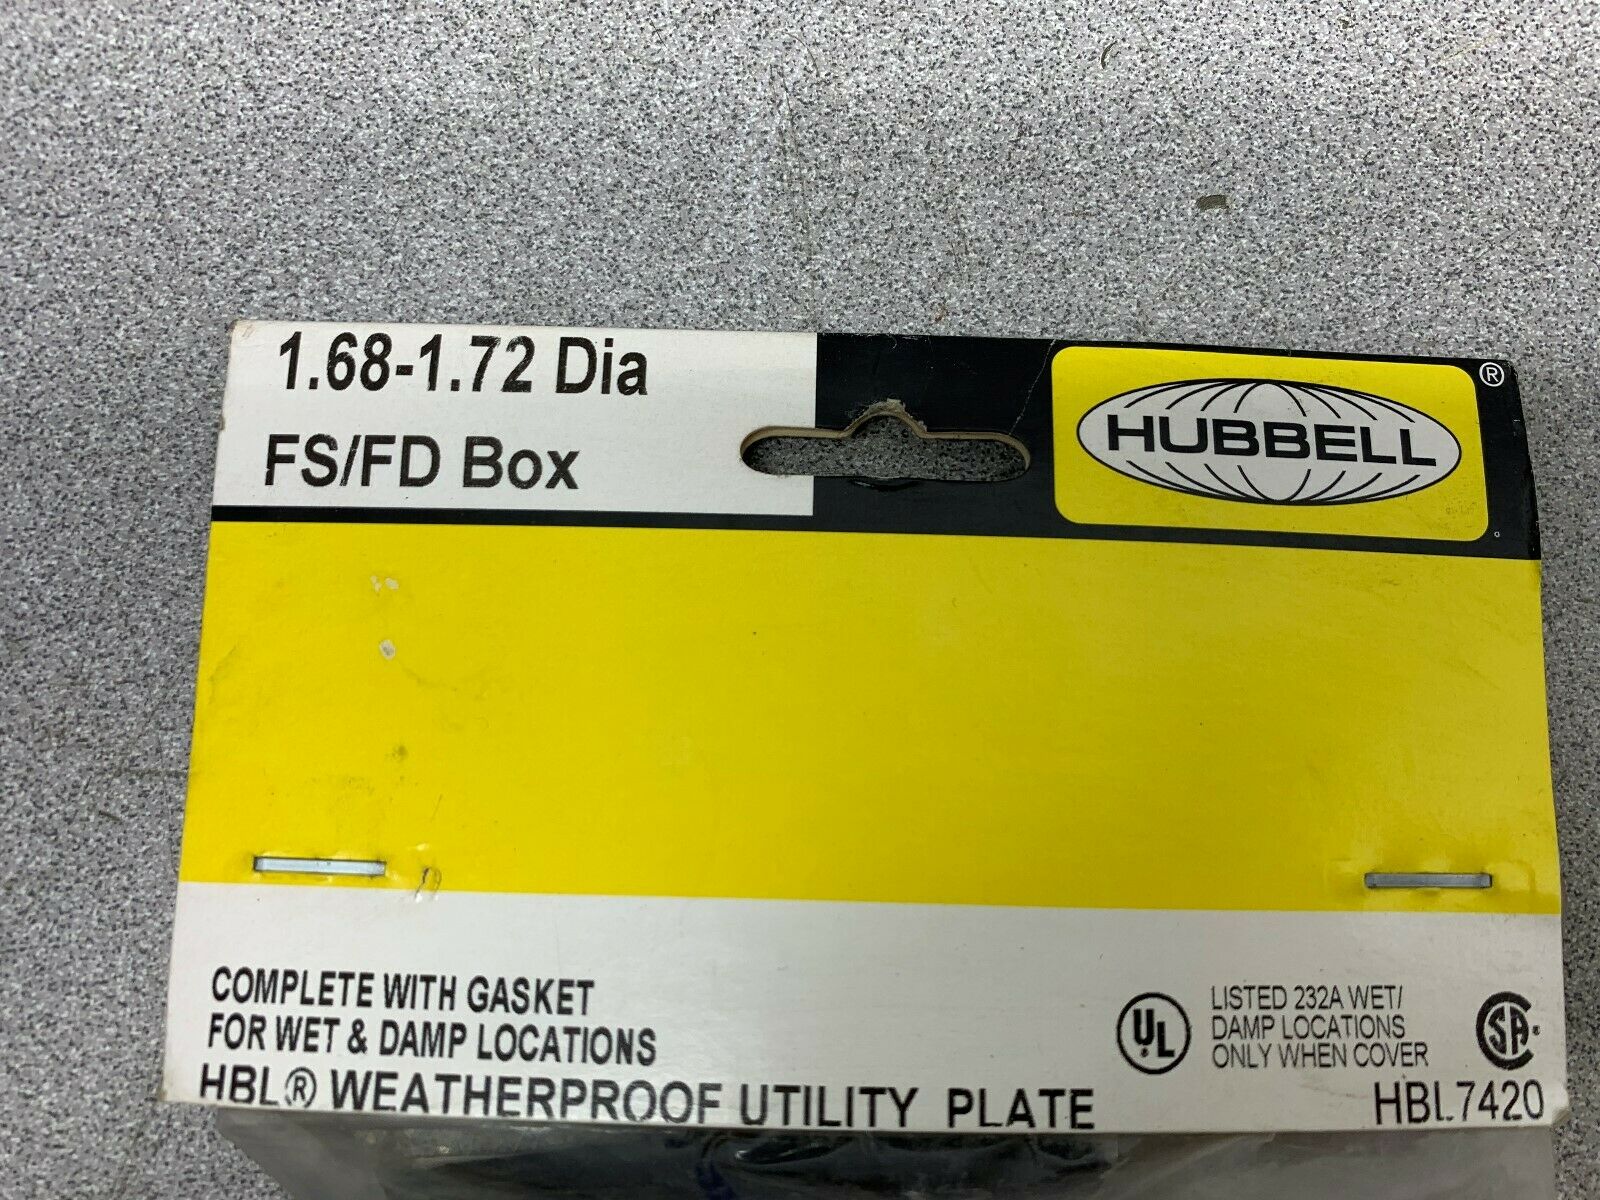 LOT OF 3 NEW NO BOX HUBBELL UTILITY PLATE 1.68-1.72 DIA